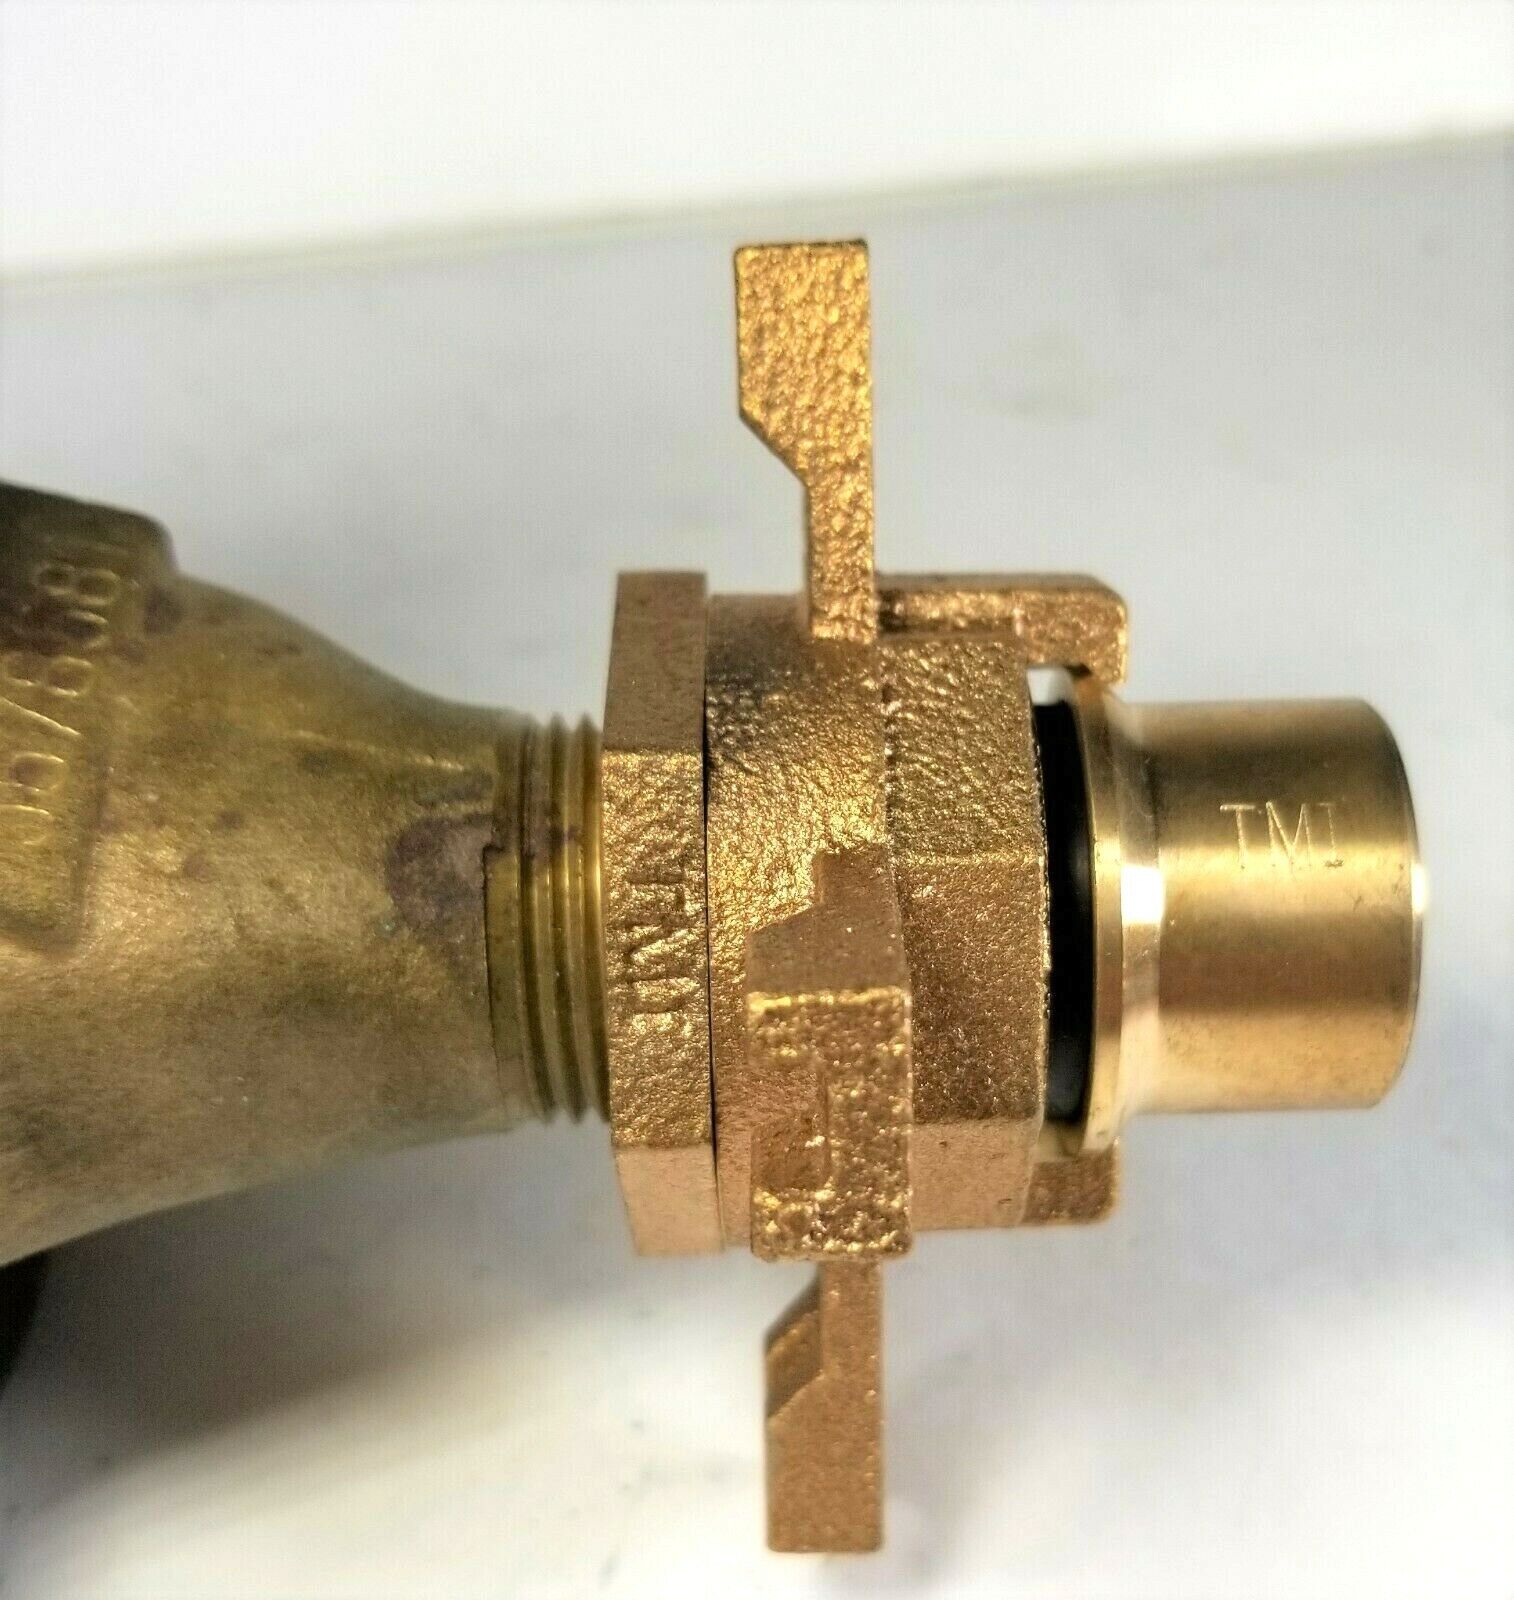 10 - Water Meter Yoke Expansion Connection Wheel for 5/8" x 1/2" Meter, NL Brass Trumbull 368-0630